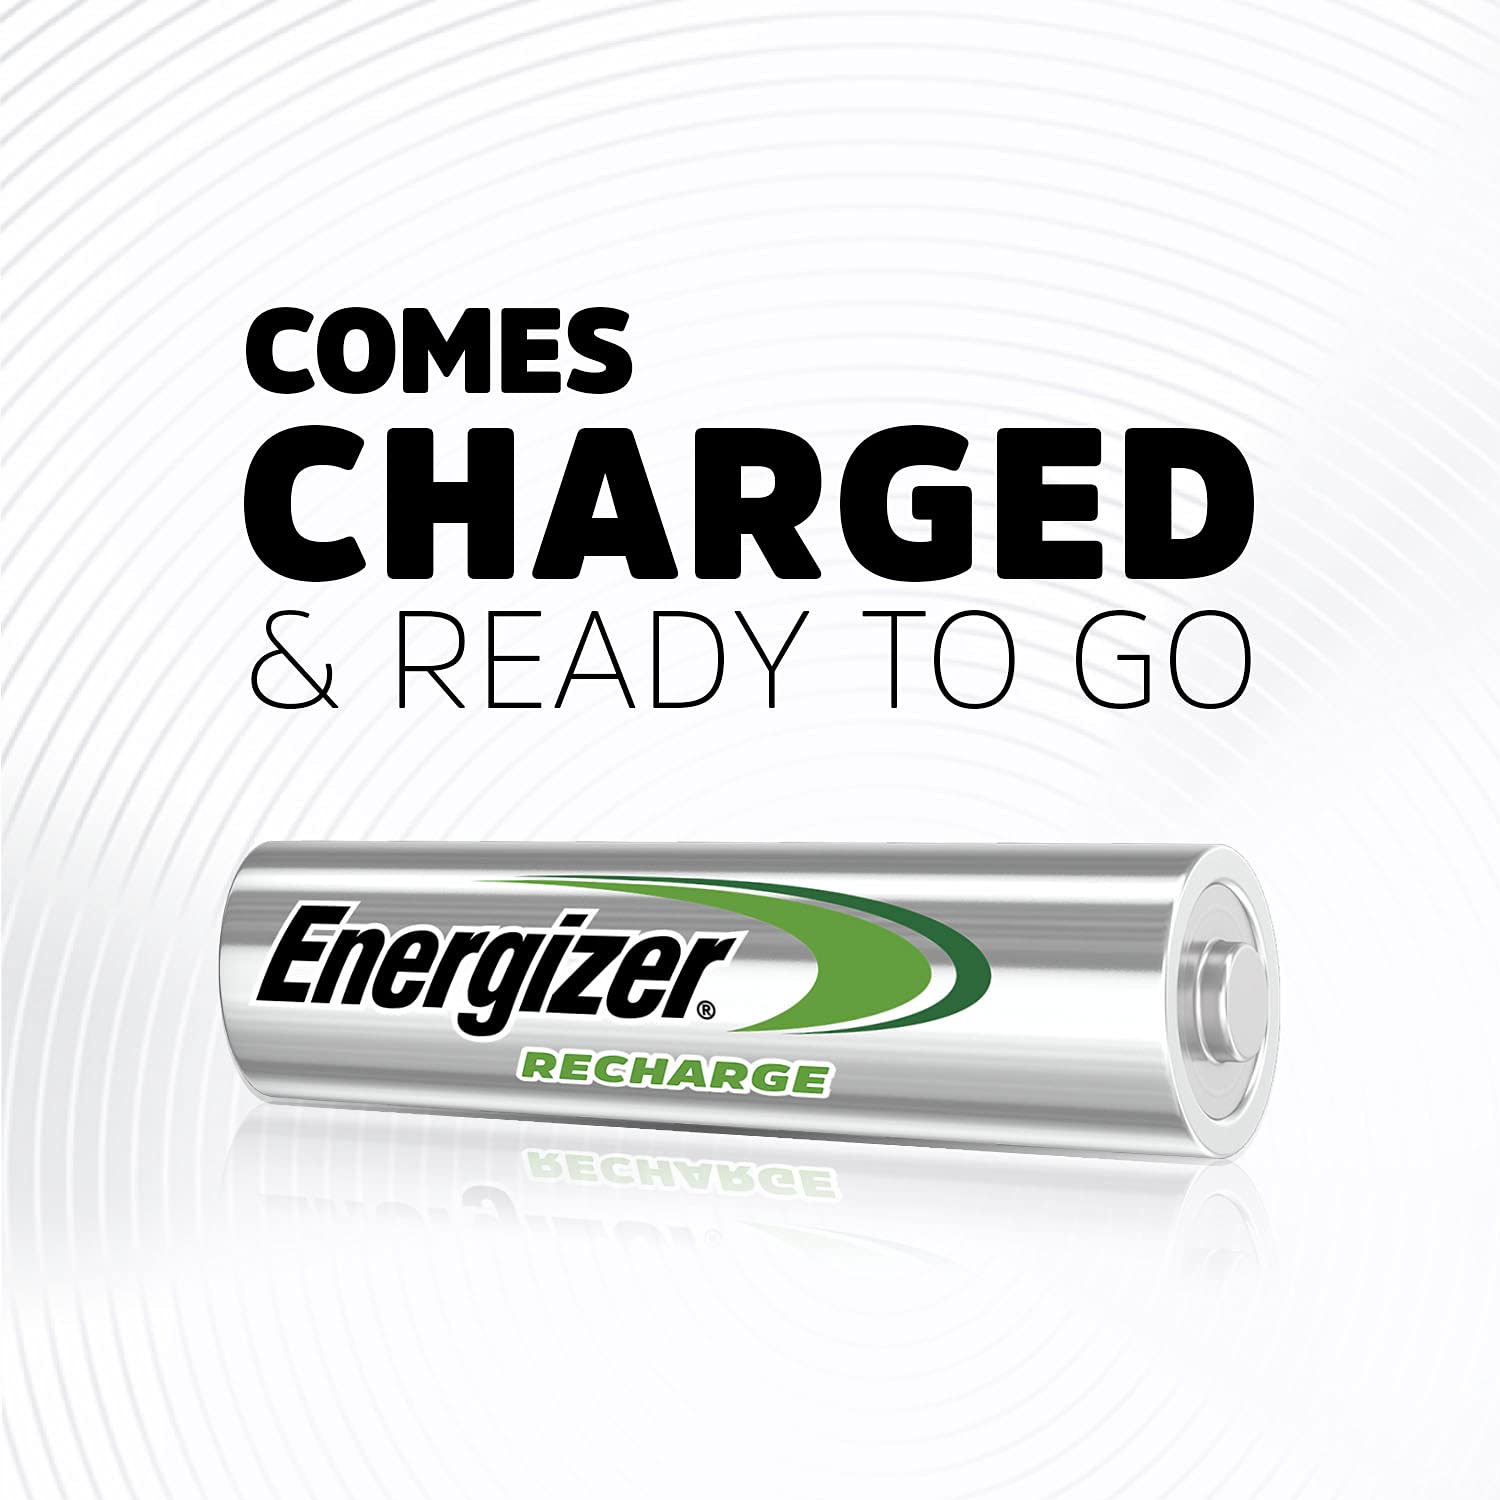 Energizer Rechargeable AA Batteries, 2,000 mAh NiMH, Pre-charged, Chargeable for 1,000 Cycles, 8 Count (Recharge Universal)